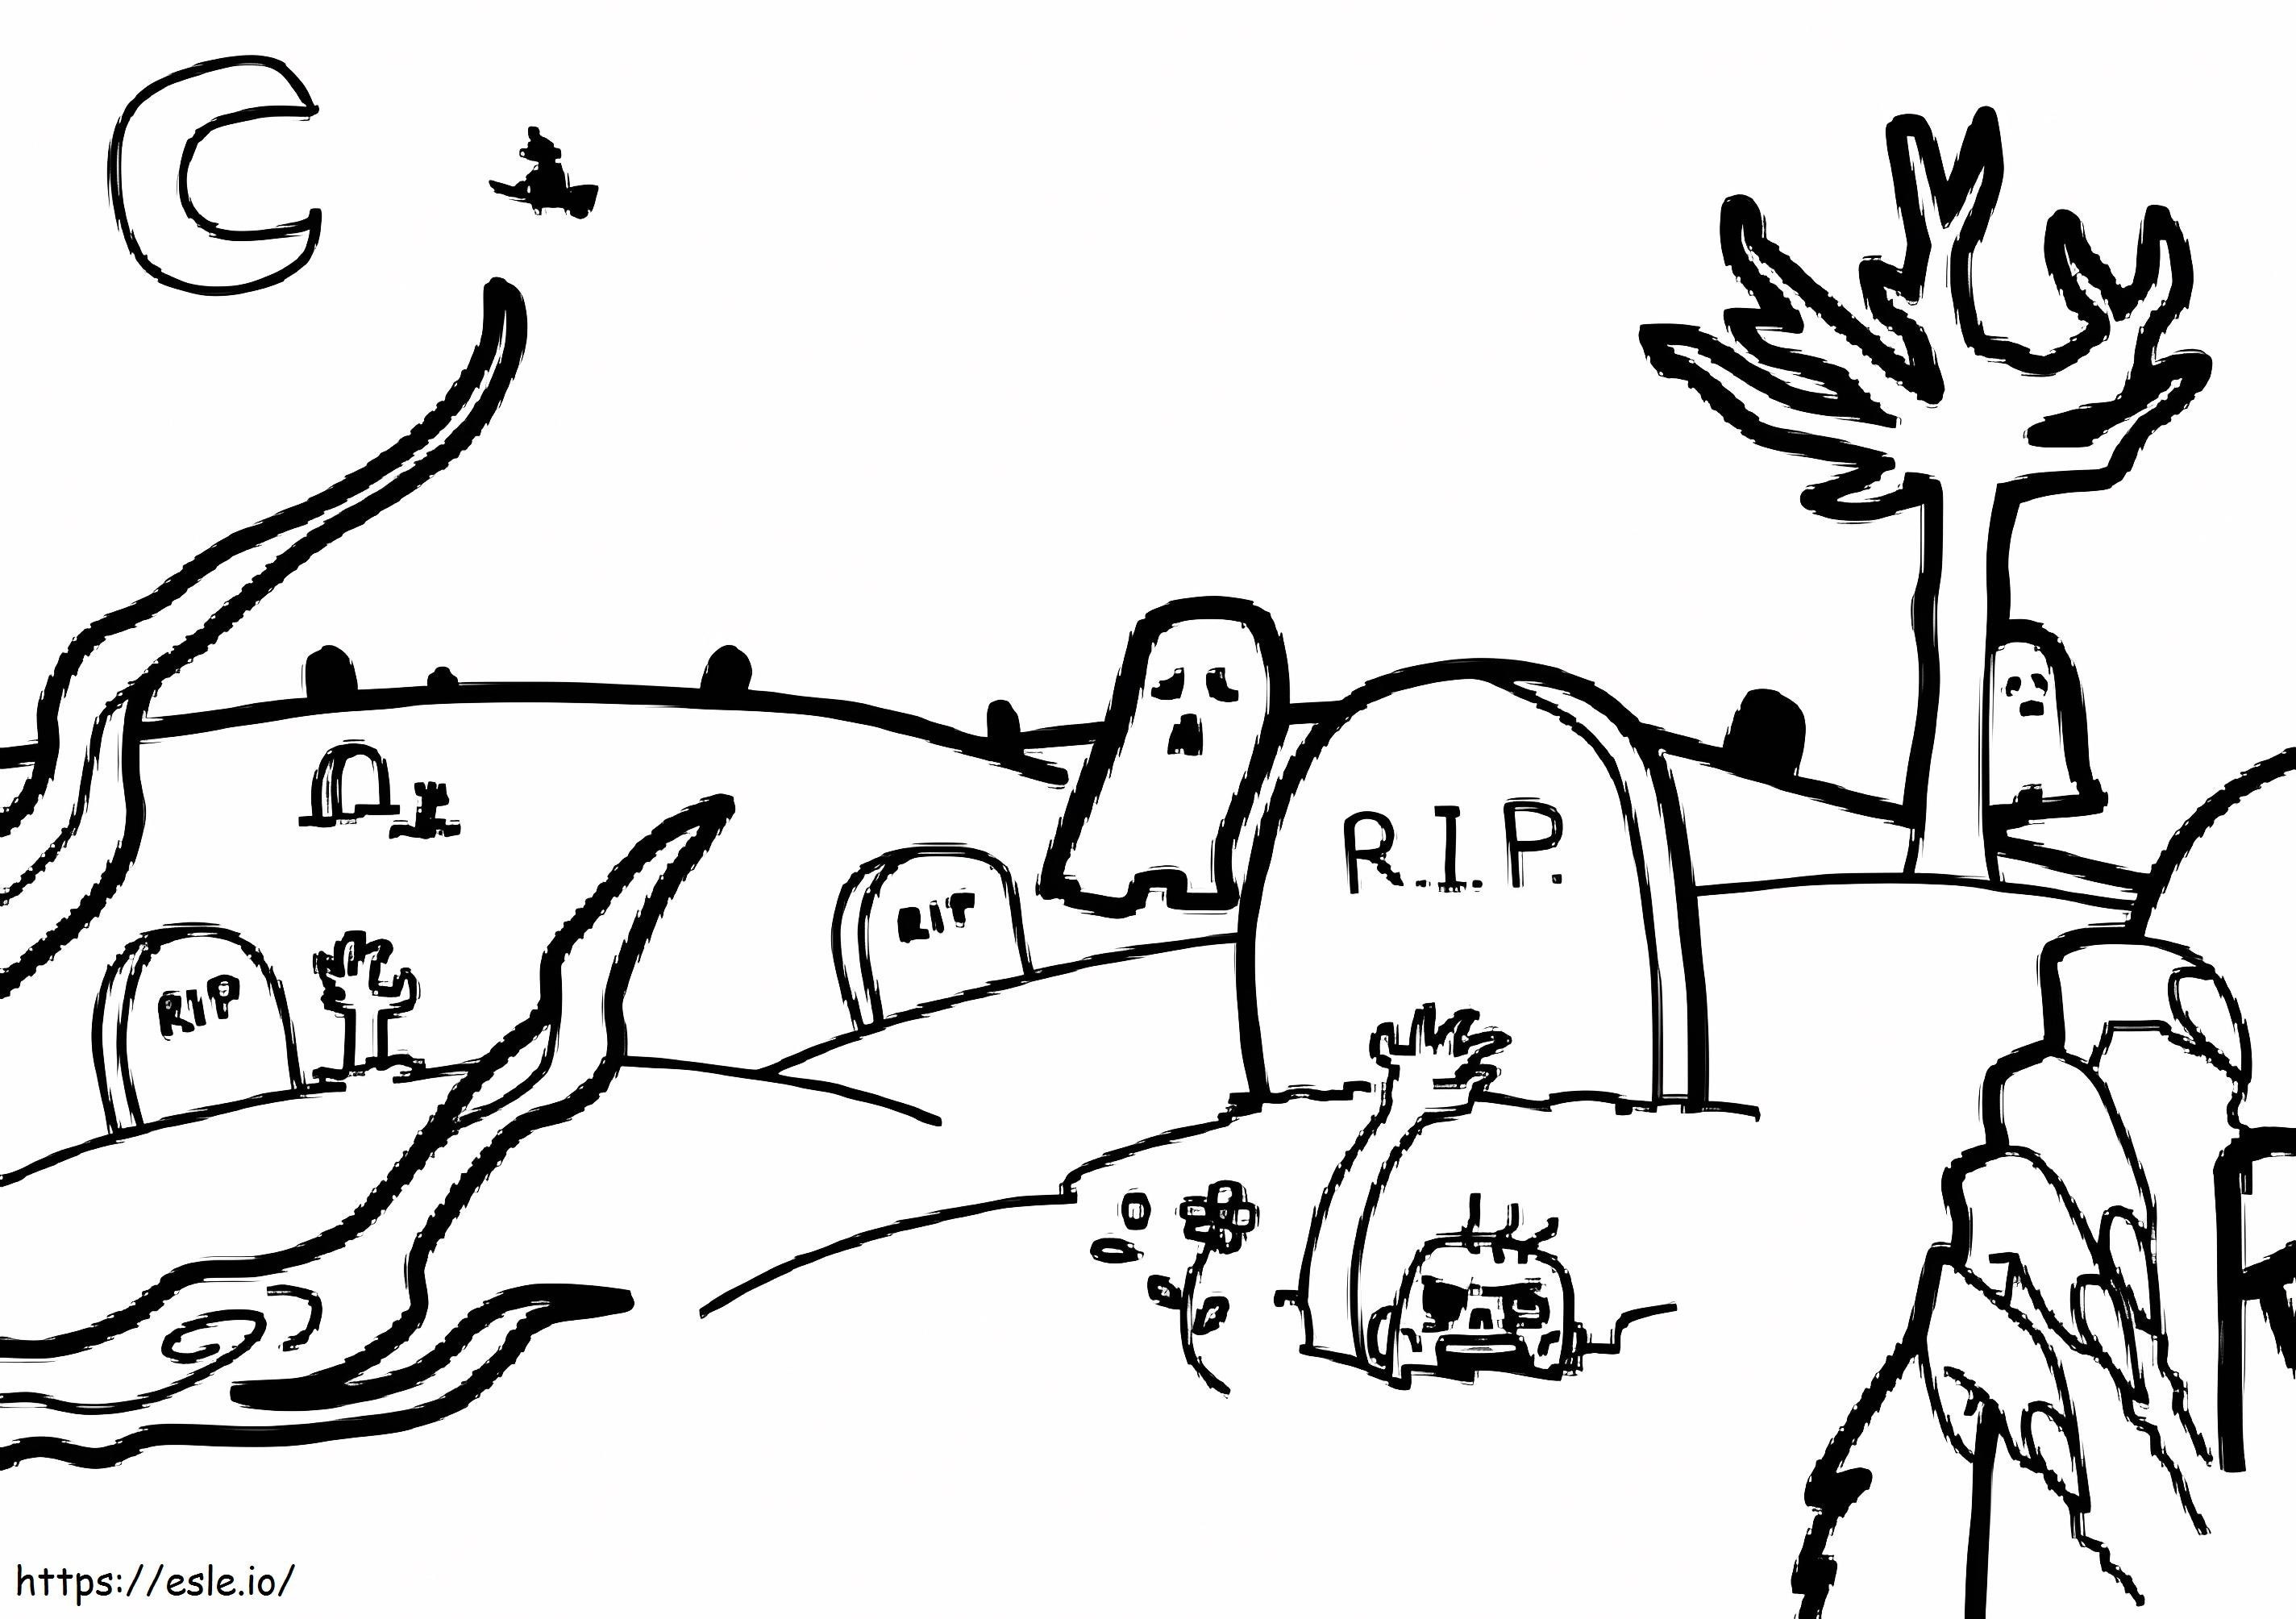 Cemetery 6 coloring page